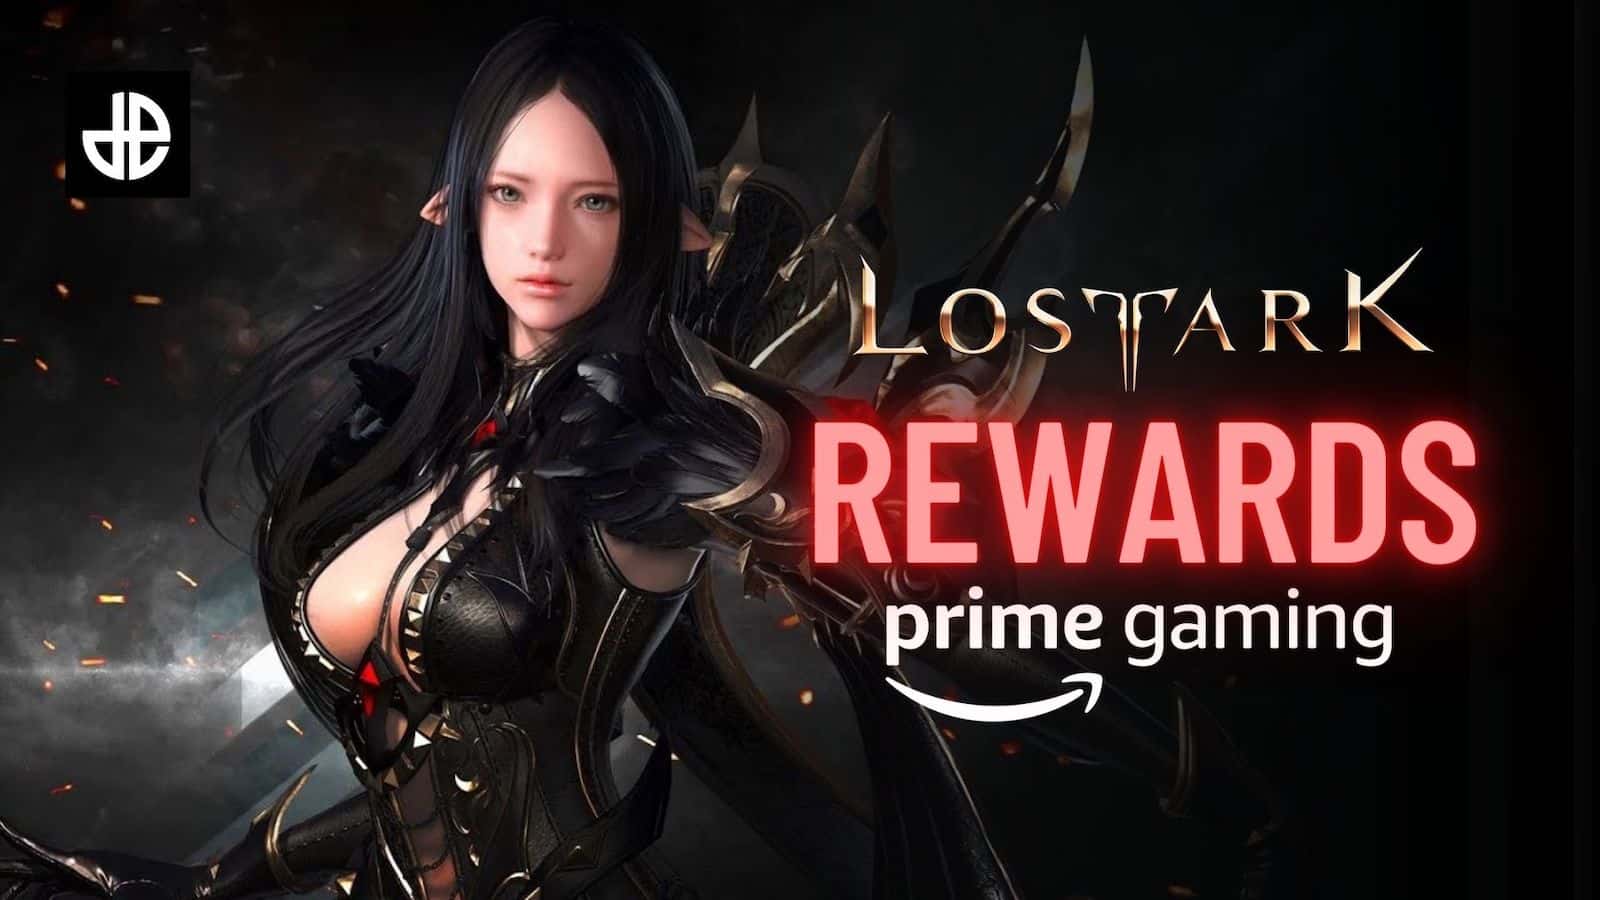 Adds Free Prime gaming Loot for Lost Ark 